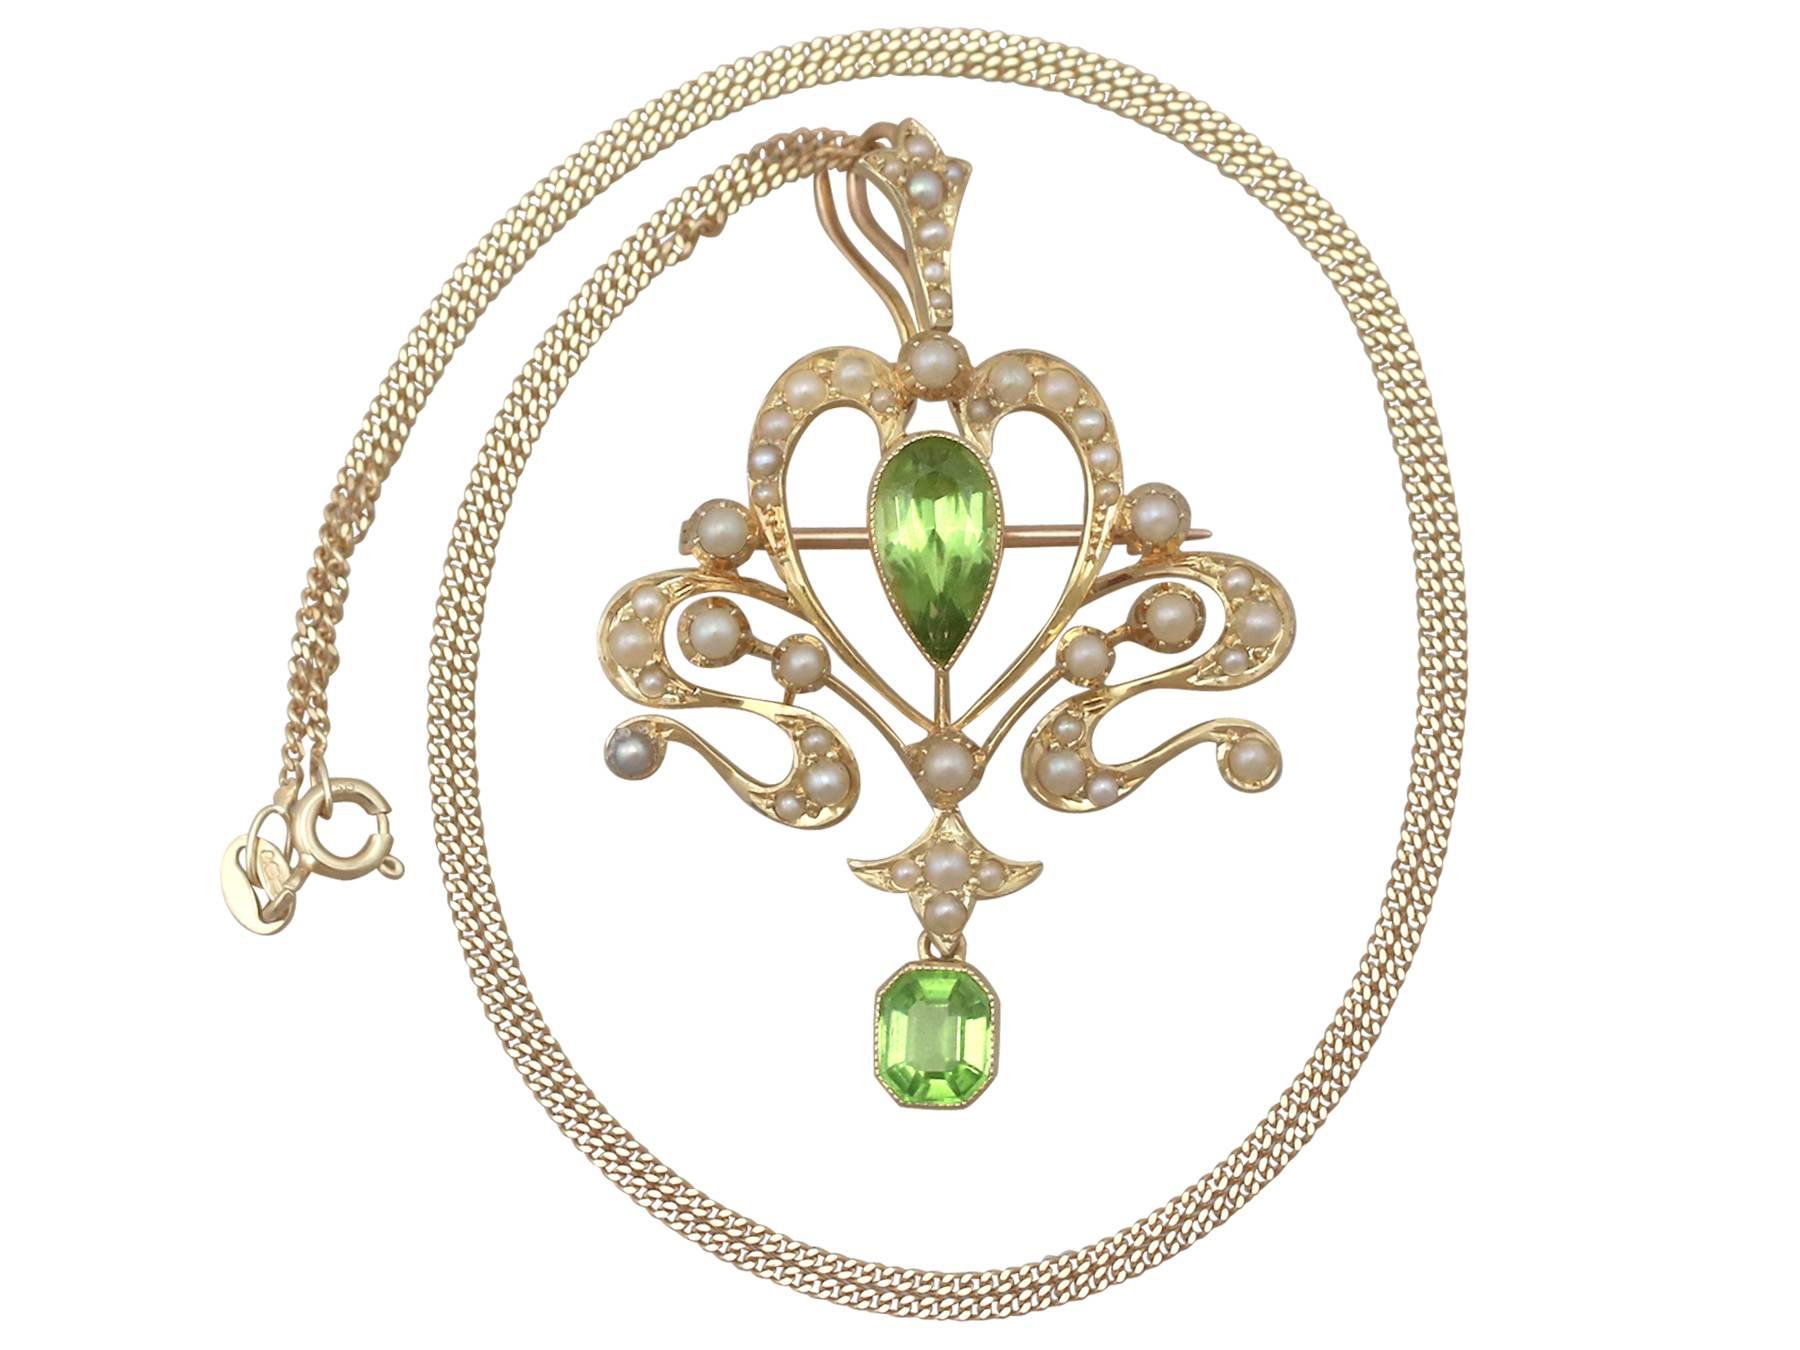 An impressive antique Art Nouveau 2.32 carat peridot and seed pearl, 15 carat yellow gold pendant / brooch; part of our diverse antique jewellery and estate jewelry collections.

This fine and impressive pearl and peridot pendant brooch has been